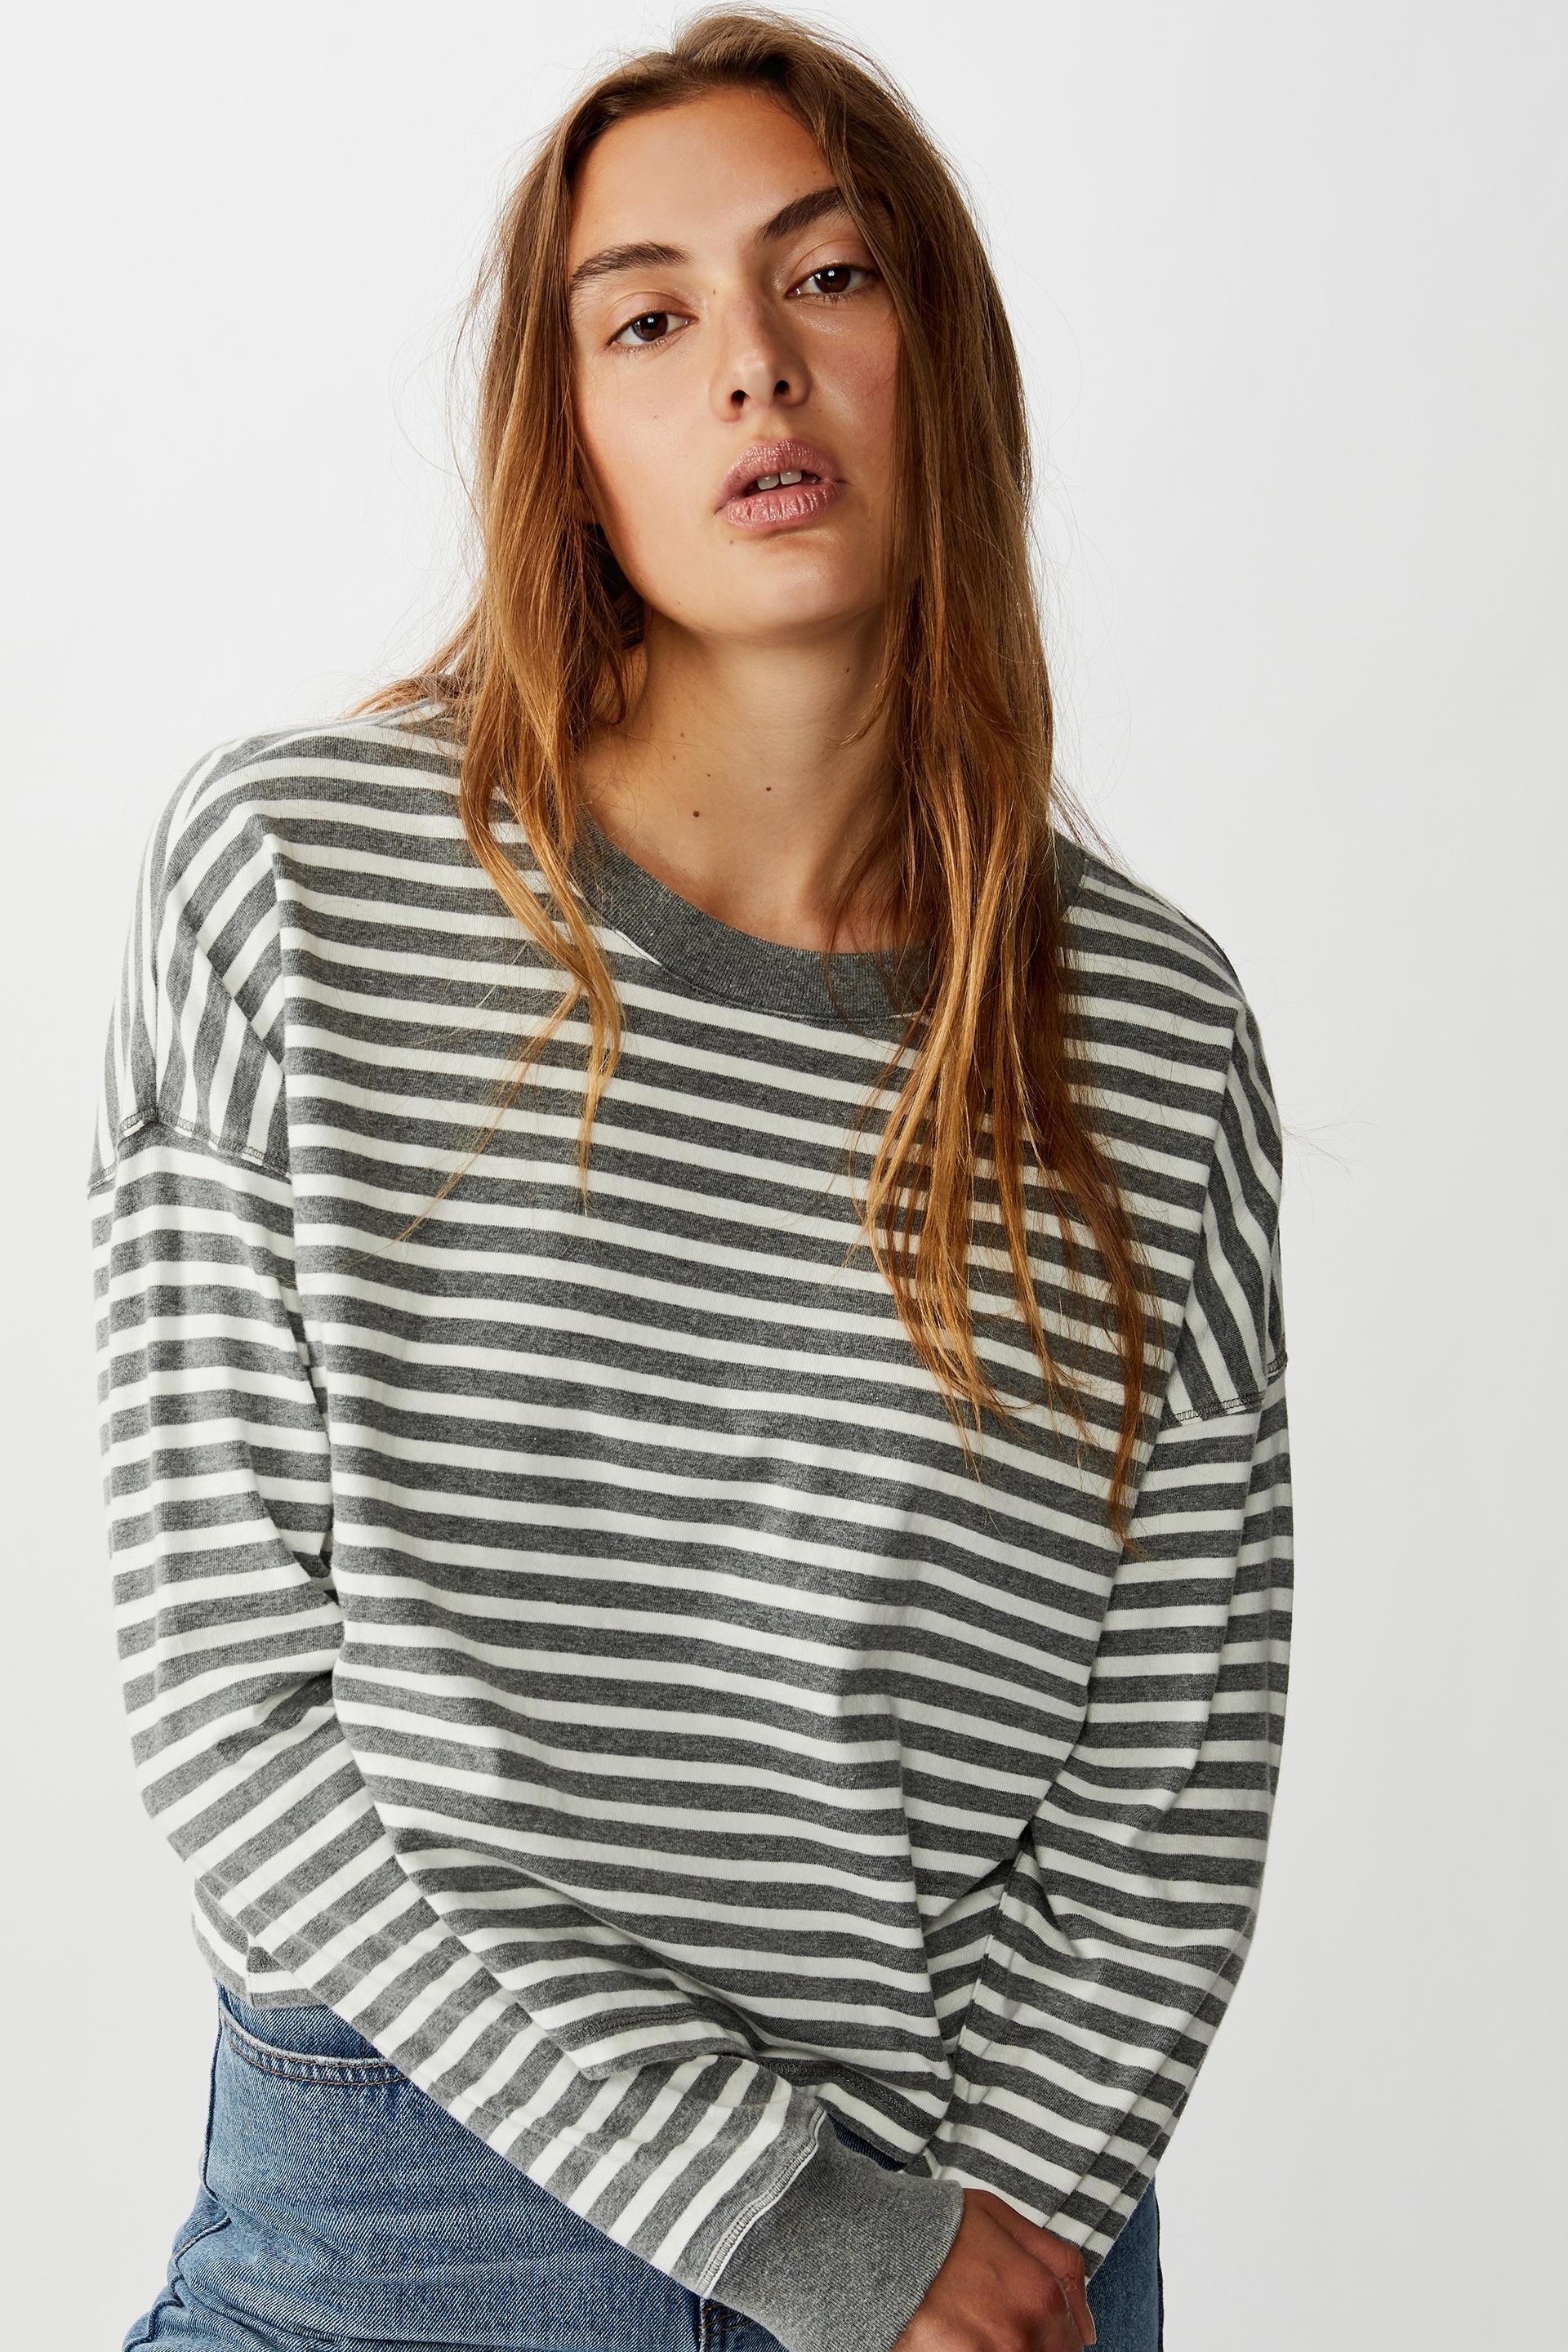 Harris crew neck long sleeve top - washed stripes charcoal/gardenia ...